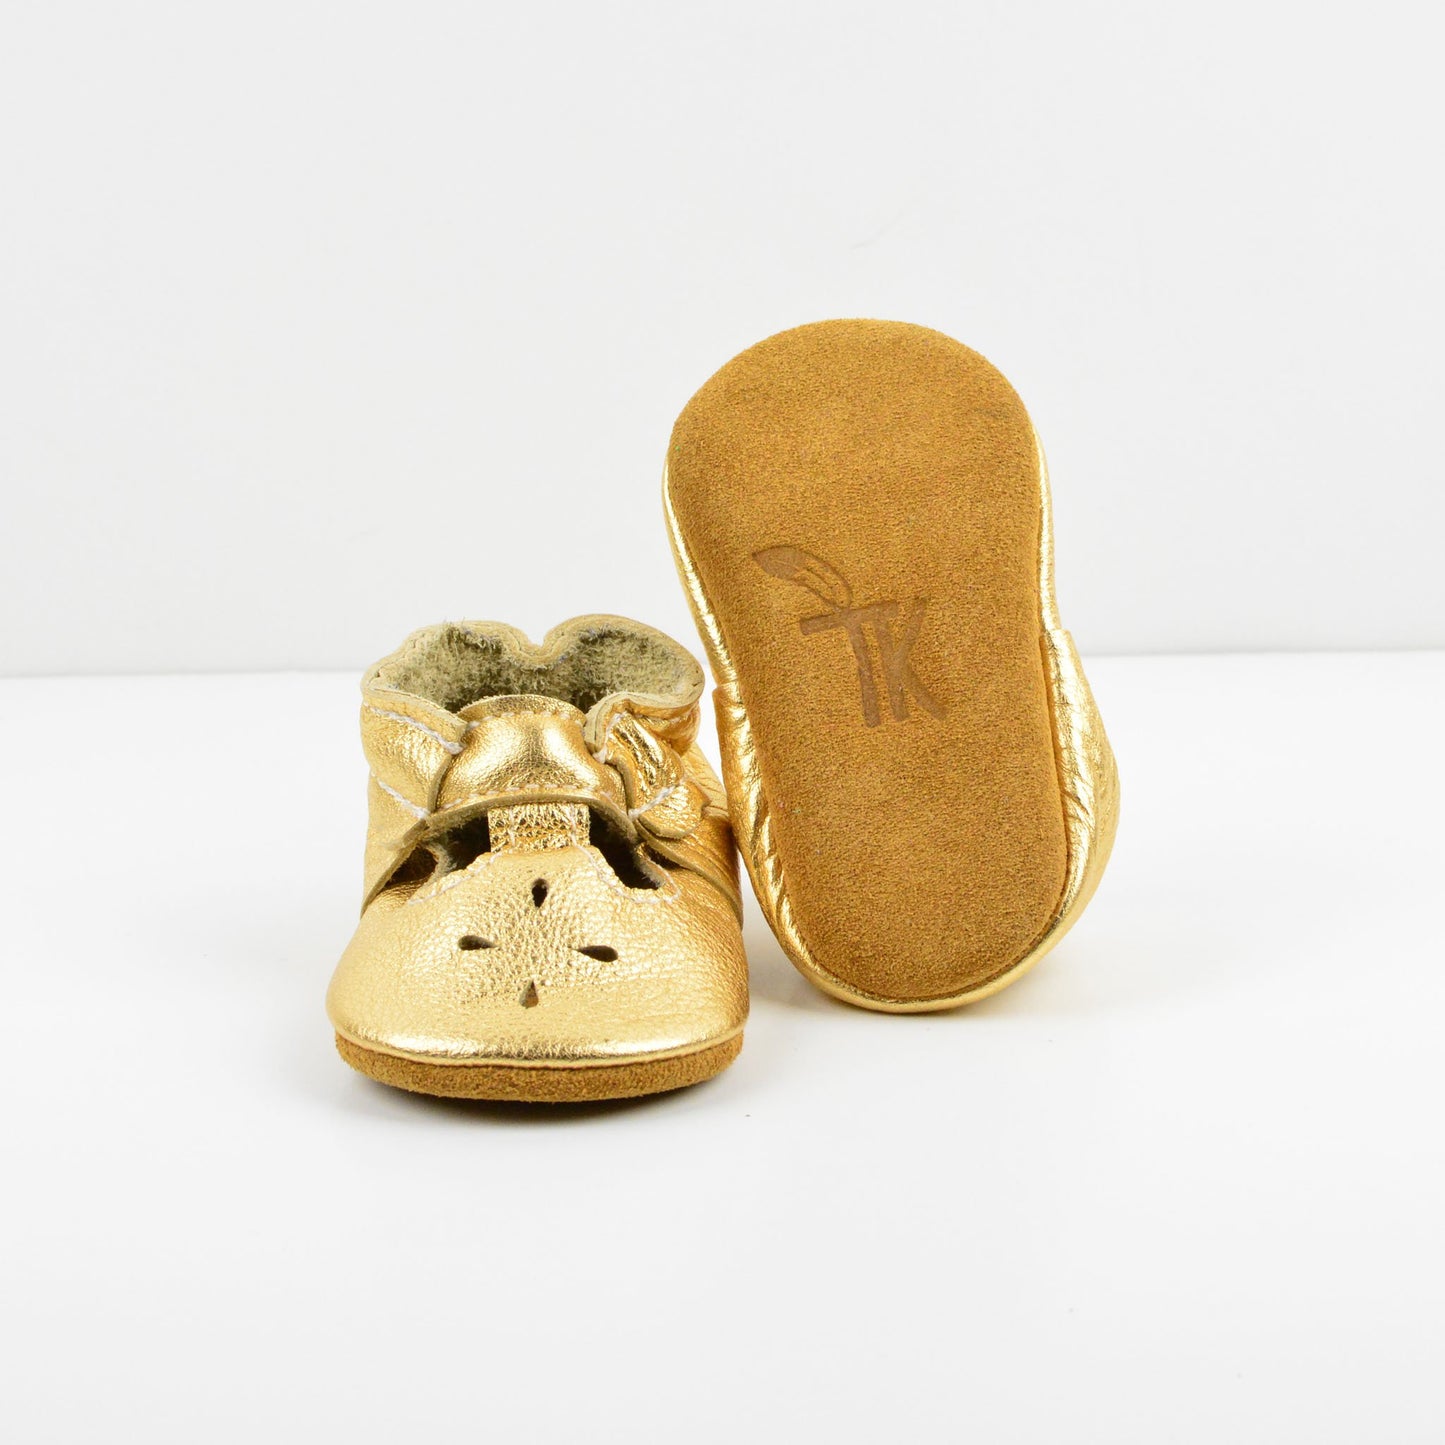 RTS Gold Metal T-straps With Tan Suede Leather Soles - Size 3 (12-18M)(5")